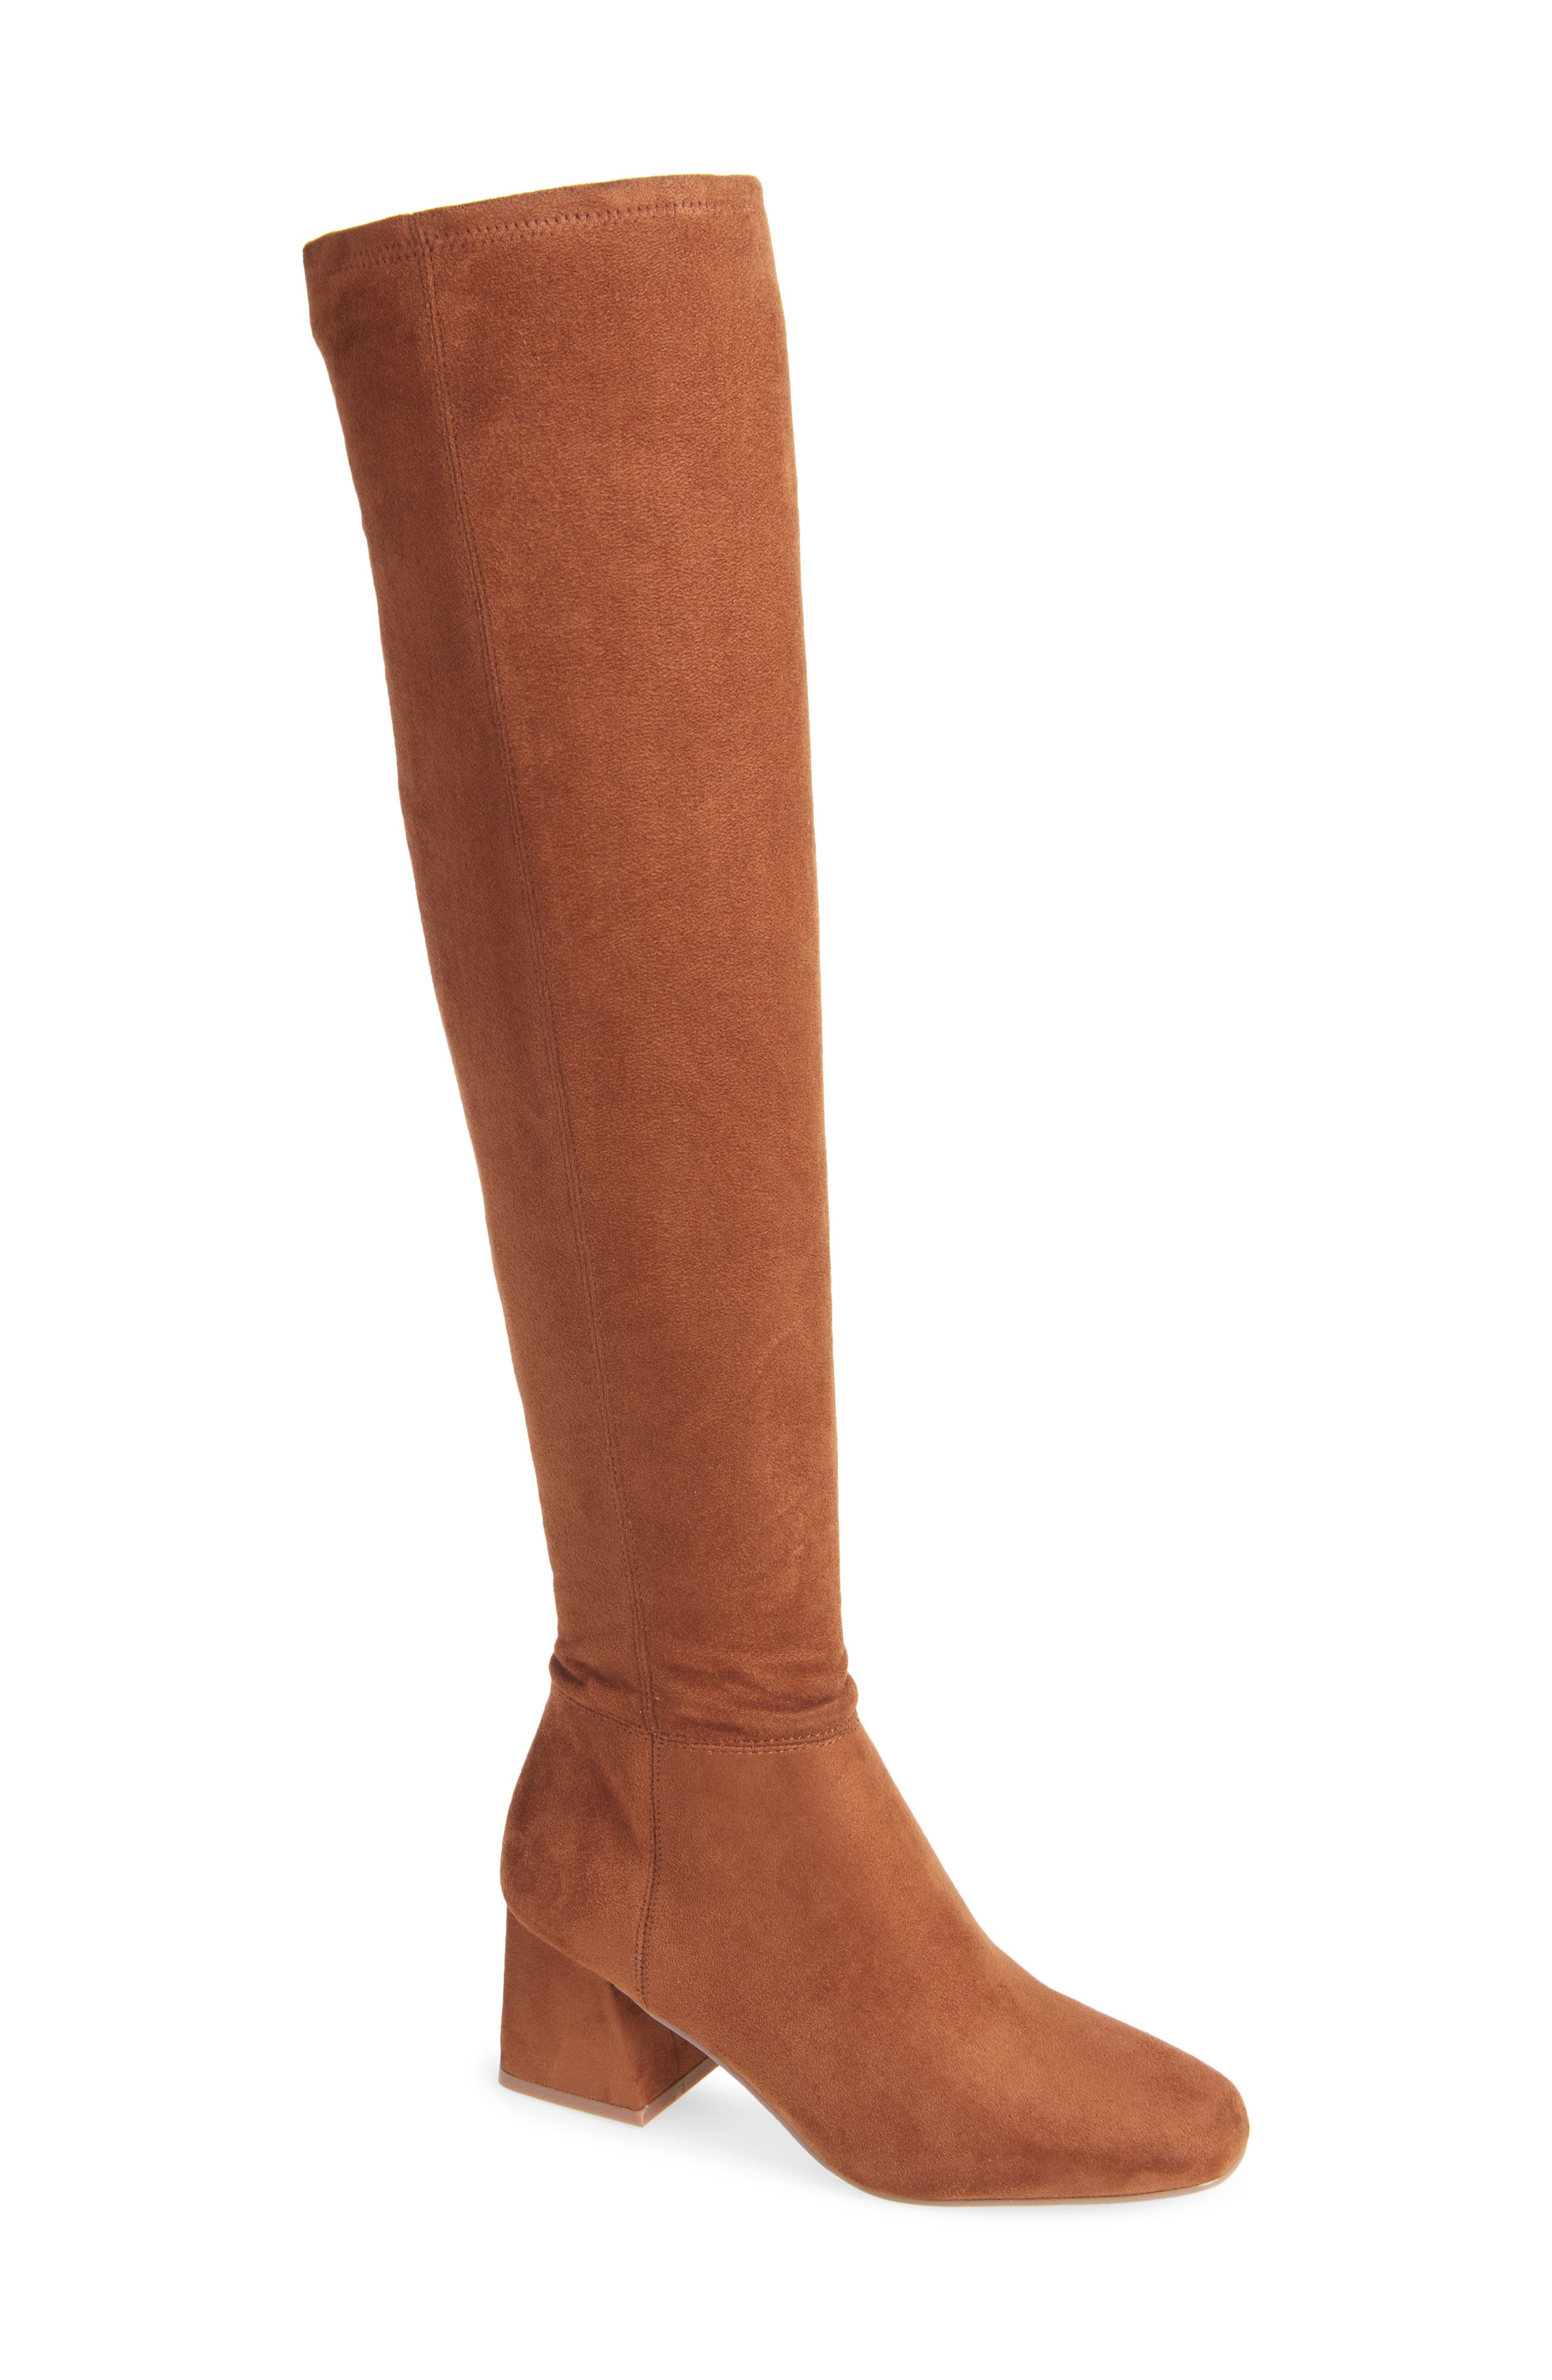 Over-the-Knee Boots for Women | Nordstrom